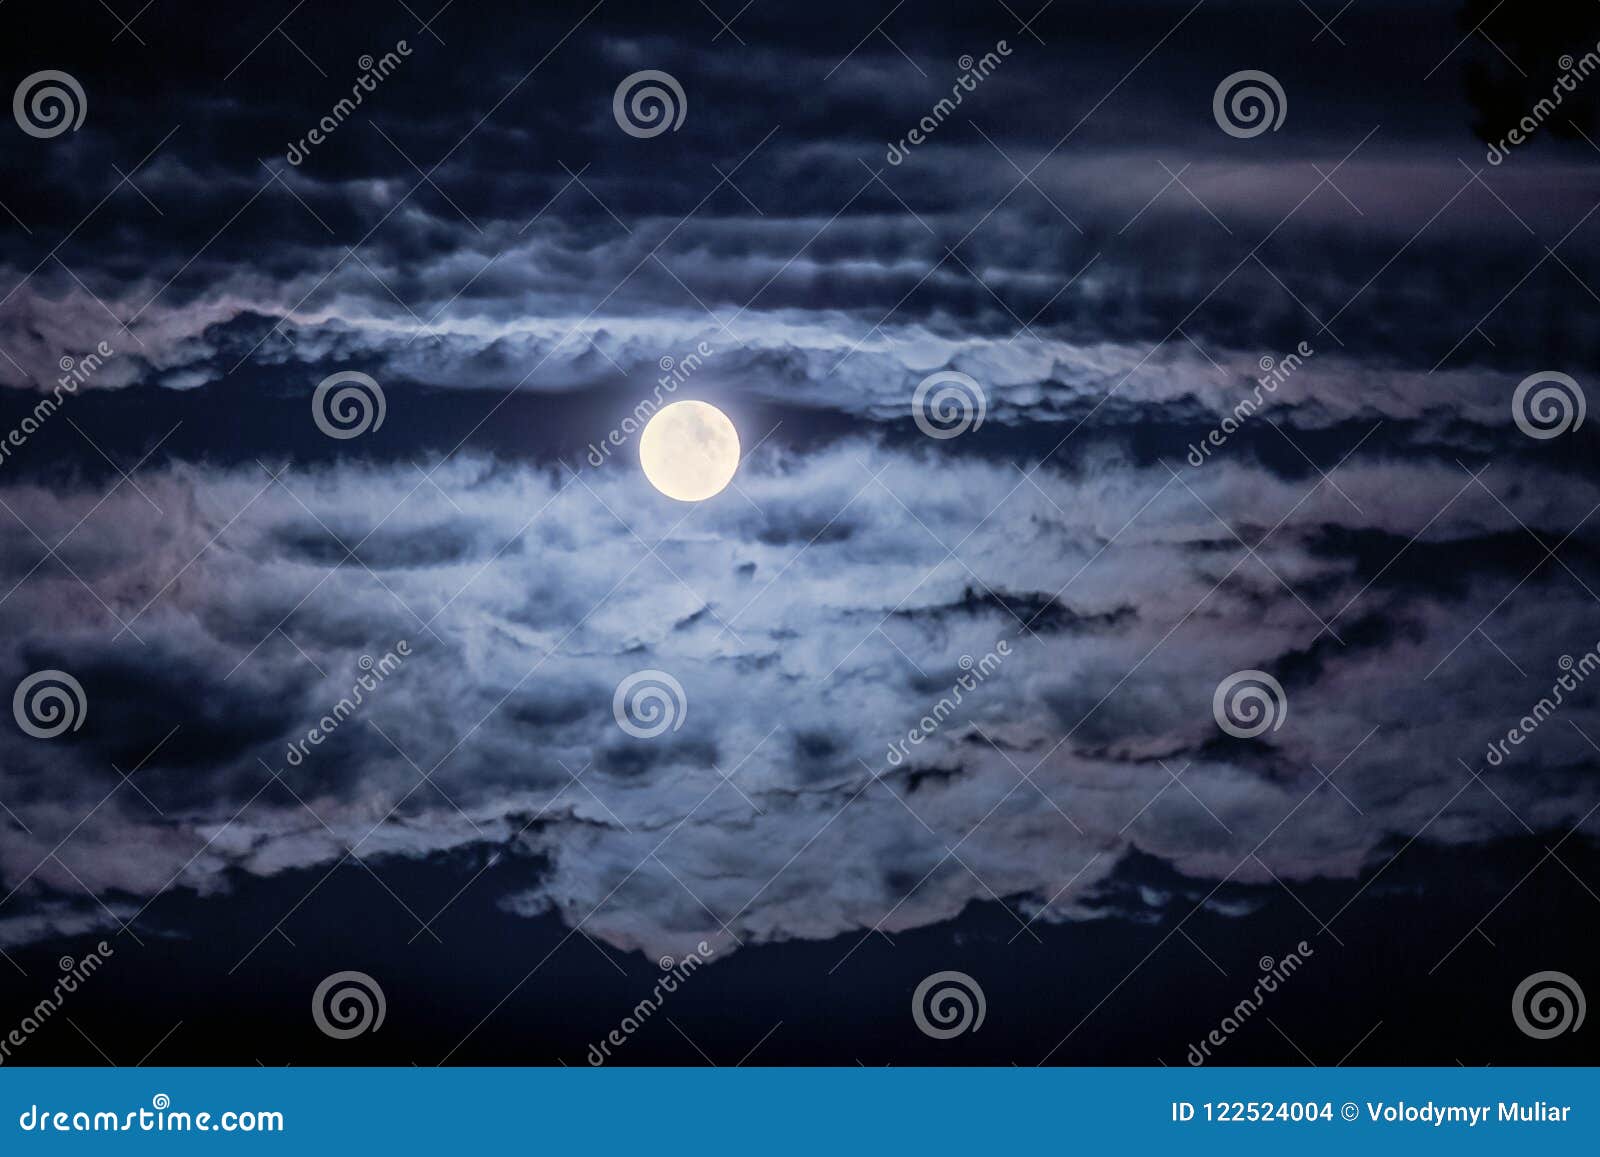 Bright Moon and Clouds in the Dark Night Sky_ Stock Photo - Image ...